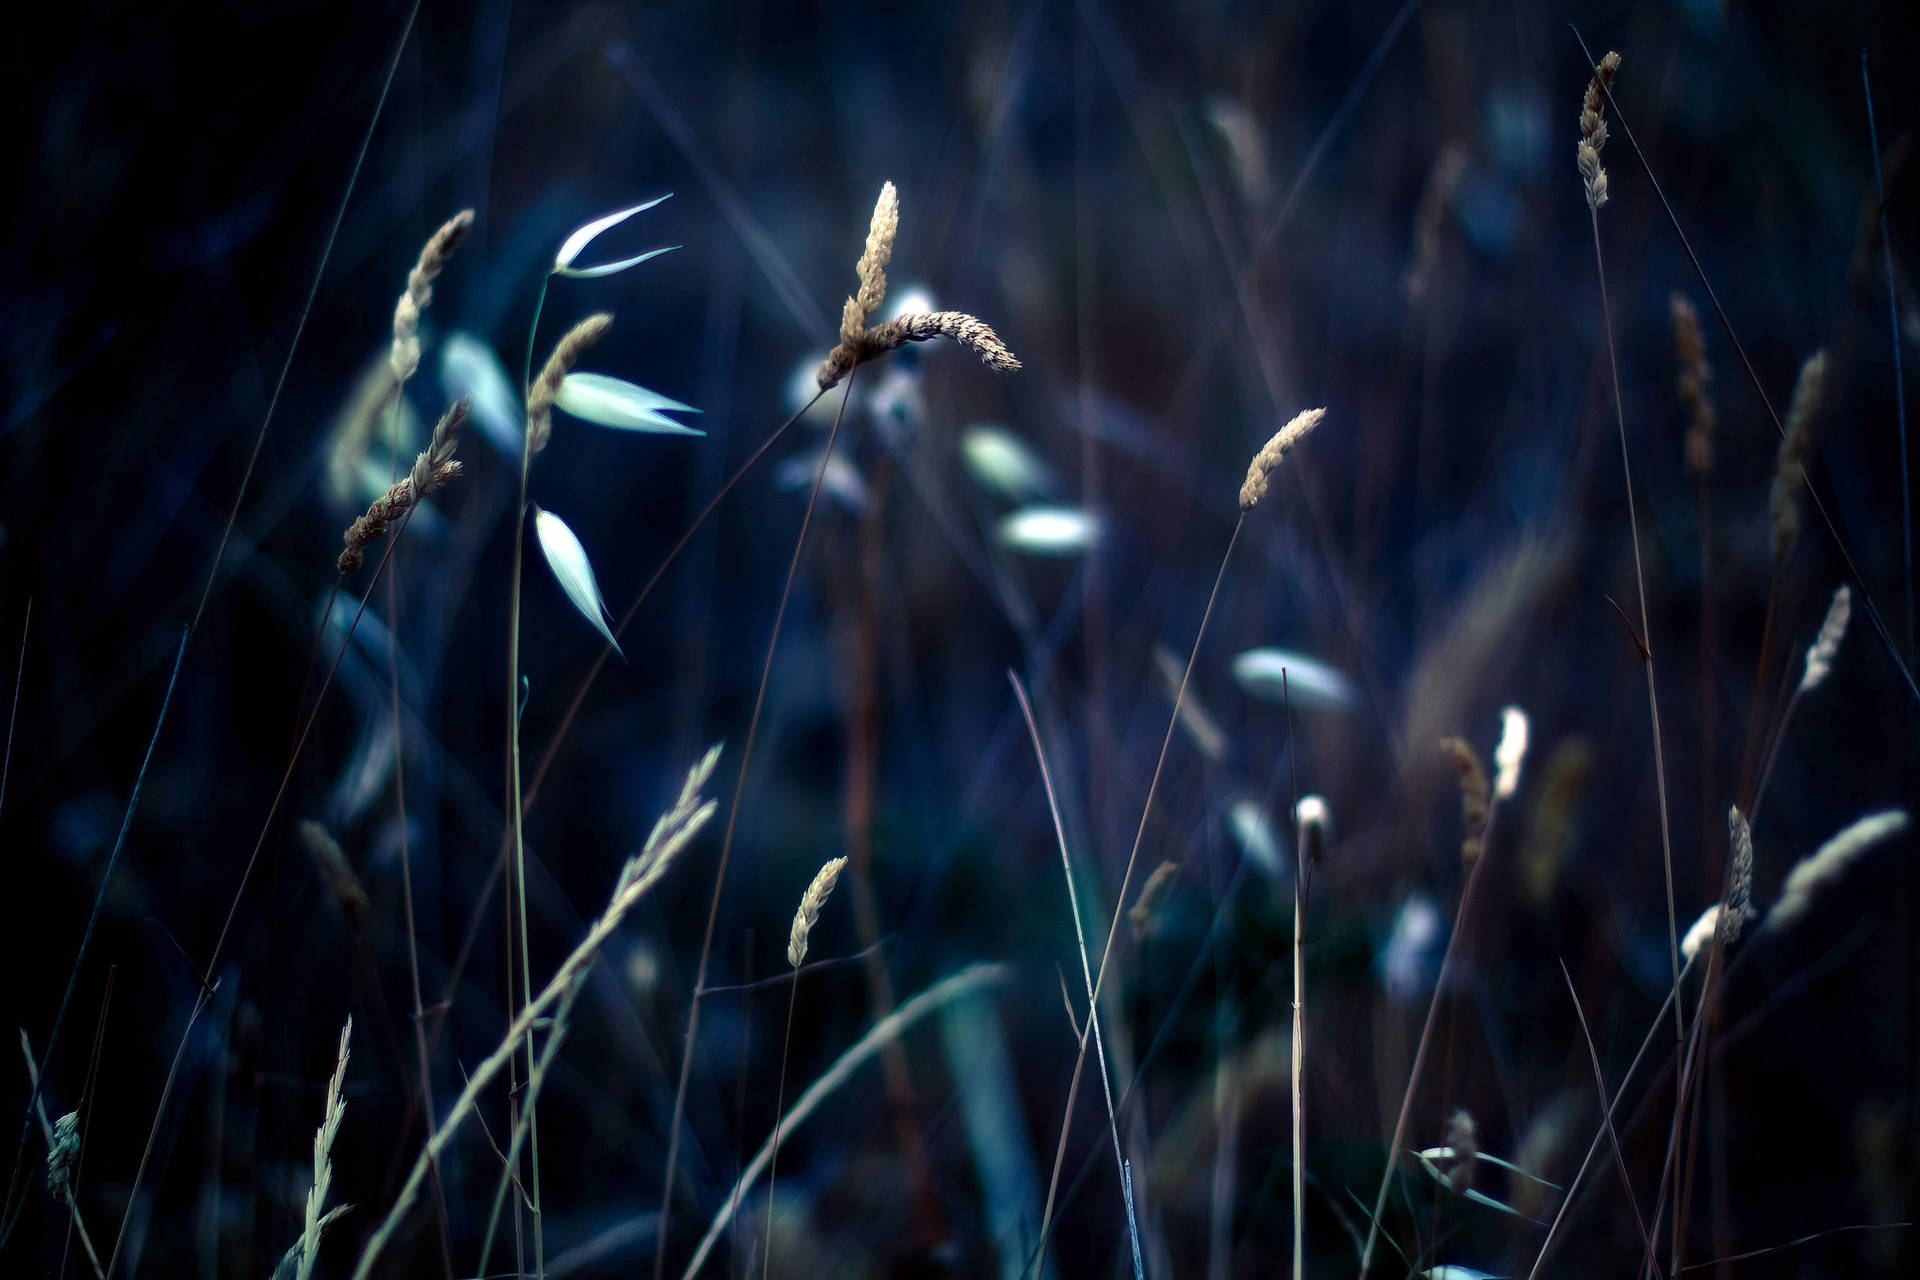 A Close-Up Look At Stalks Of Grass Under The Night Sky Wallpaper